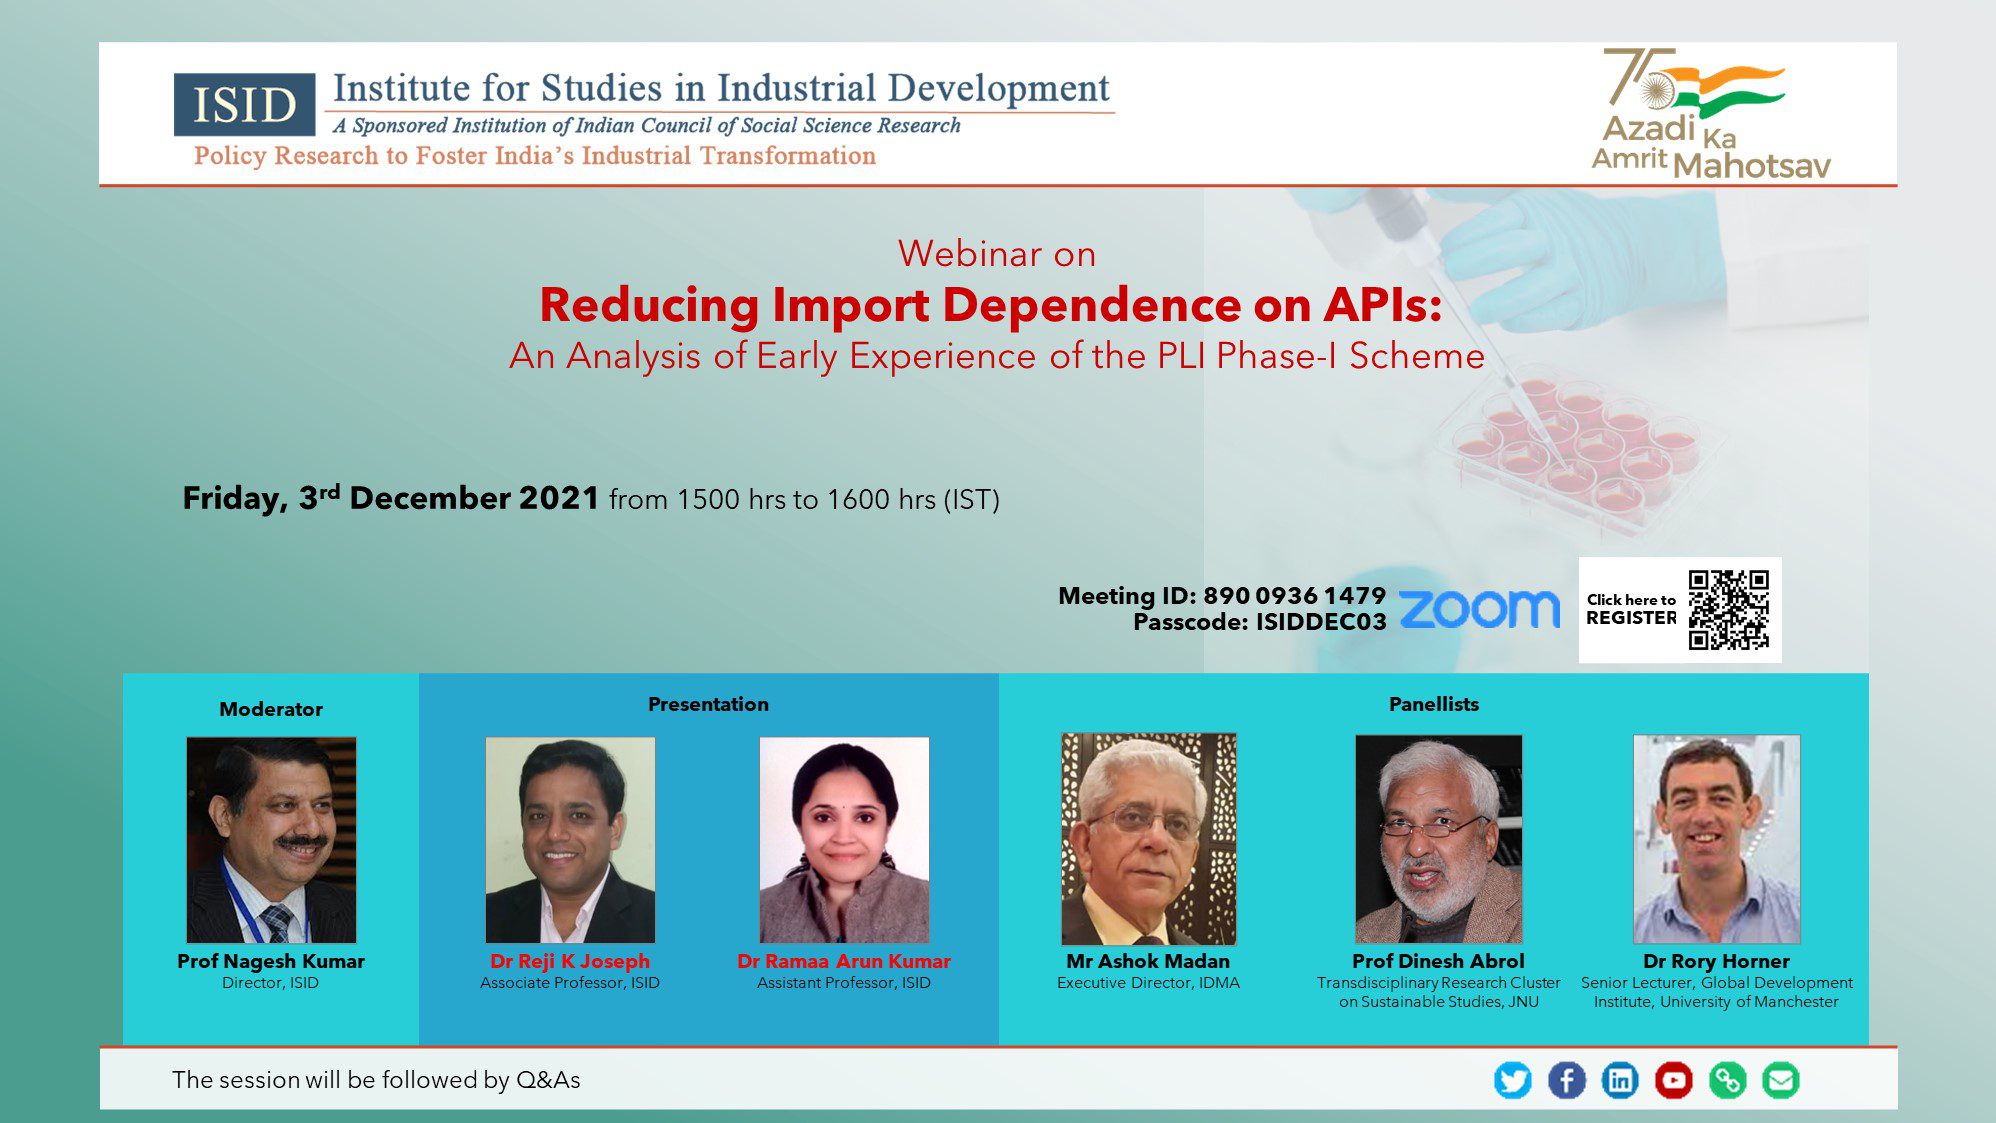 Webinar on Reducing Import Dependence on APIs: An Analysis of Early Experience of the PLI Phase-I Scheme